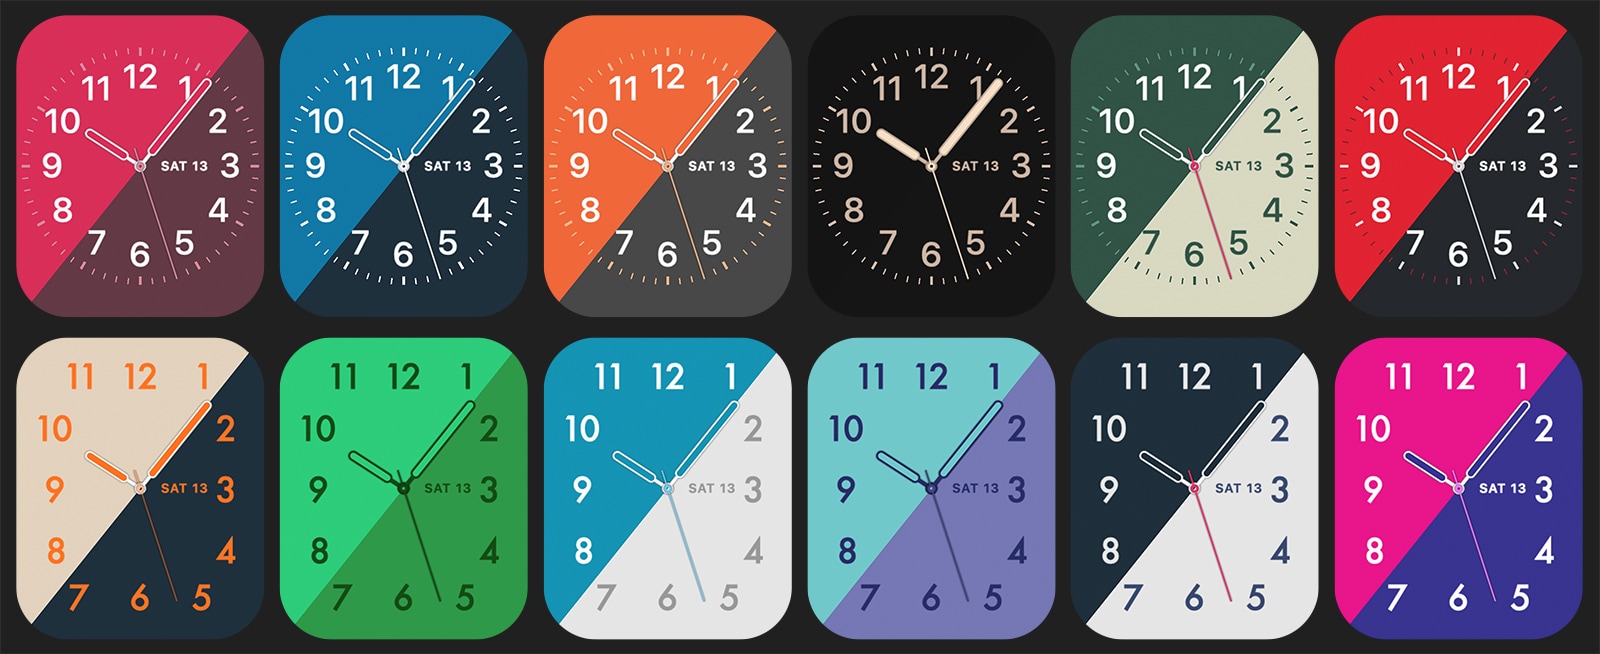 You can create and use unofficial dials in Apple Watch - to some extent